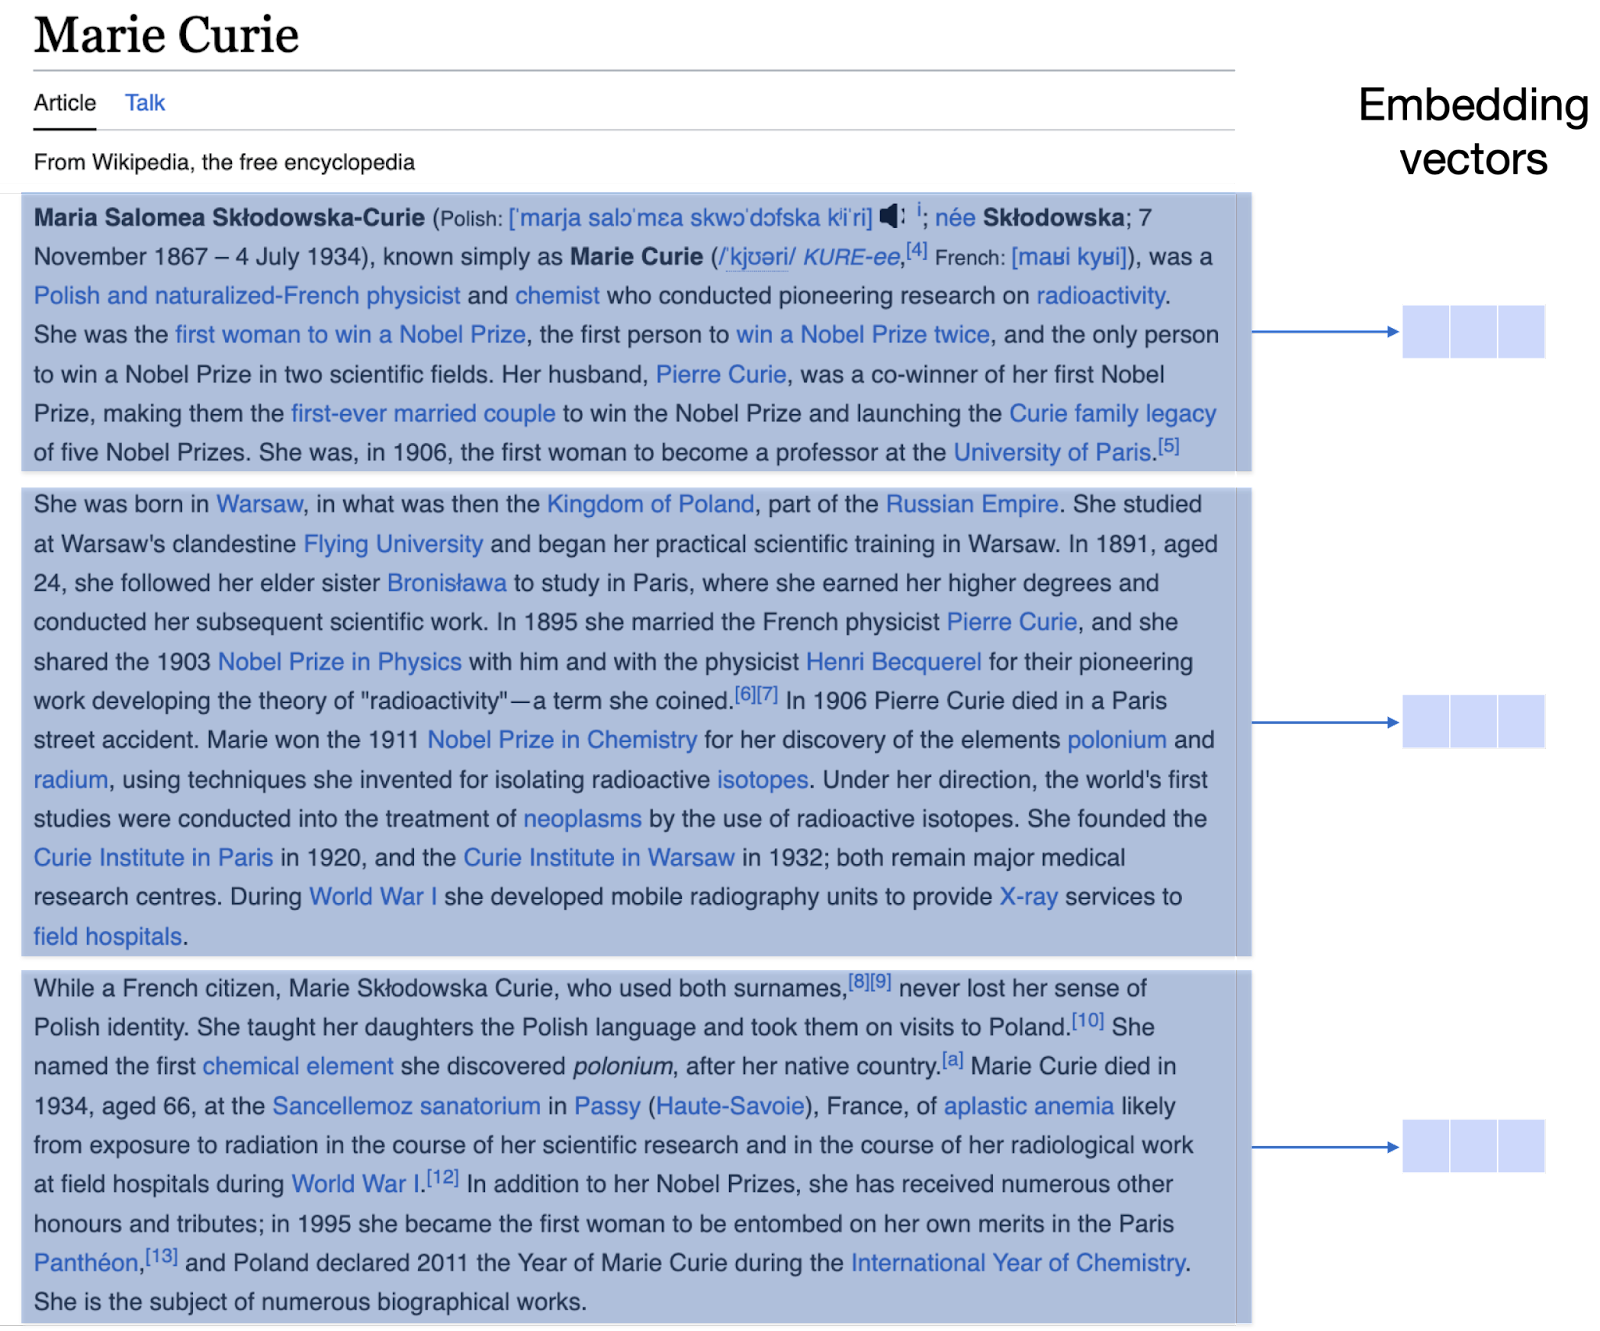 Wikipedia articles get chunked by paragraph, and each chunk gets assigned an embedding vector